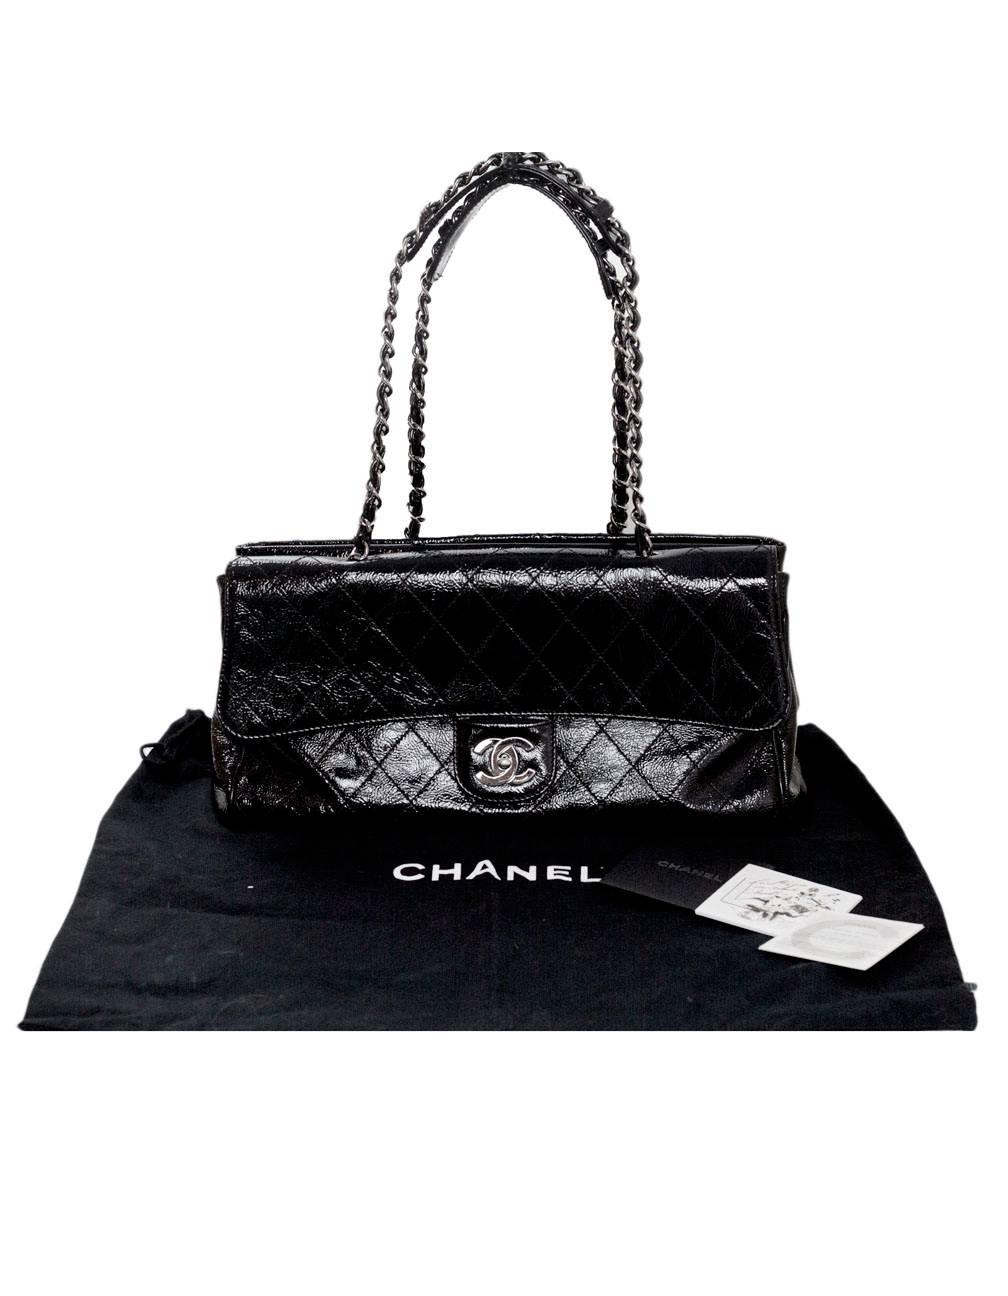 Chanel Black Crackled Patent Leather Ritz Quilted Flap Bag  3